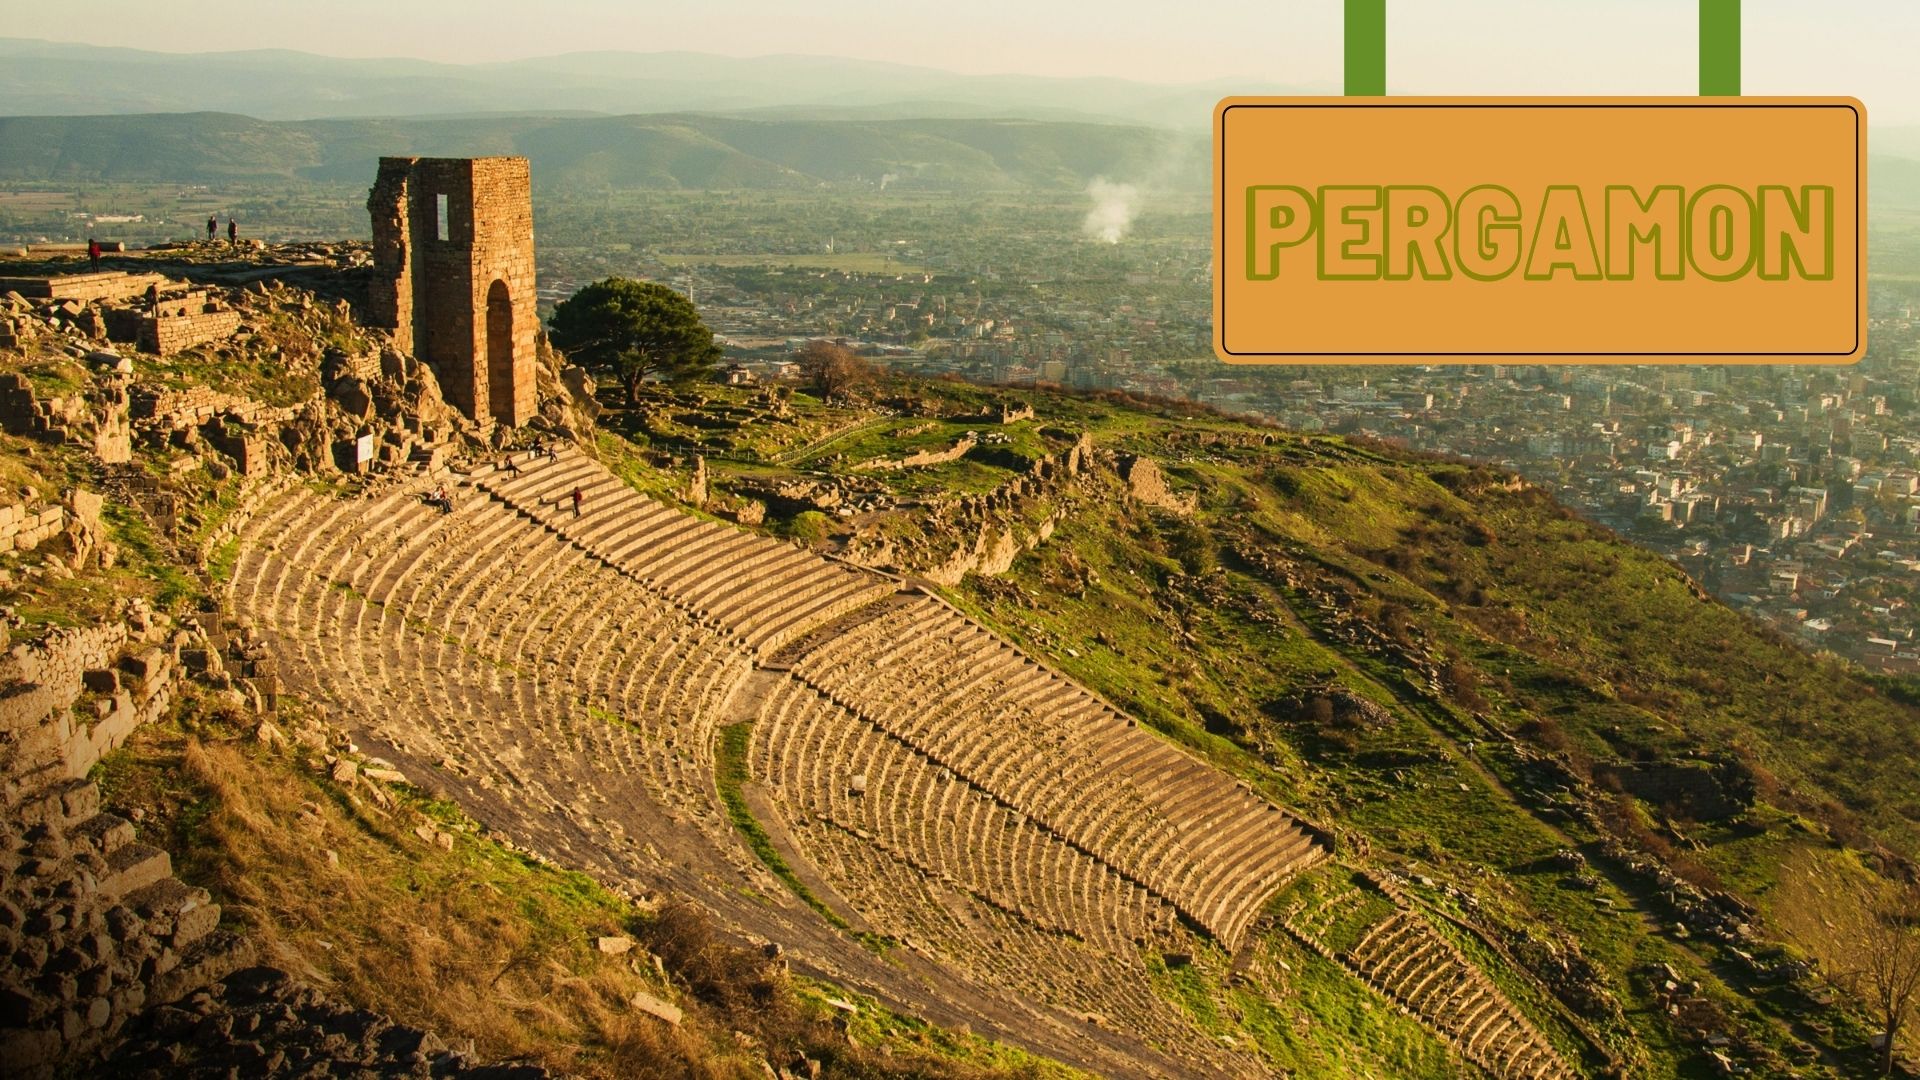 PERGAMON AND ITS MULTILAYERED CULTURAL LANDSCAPE